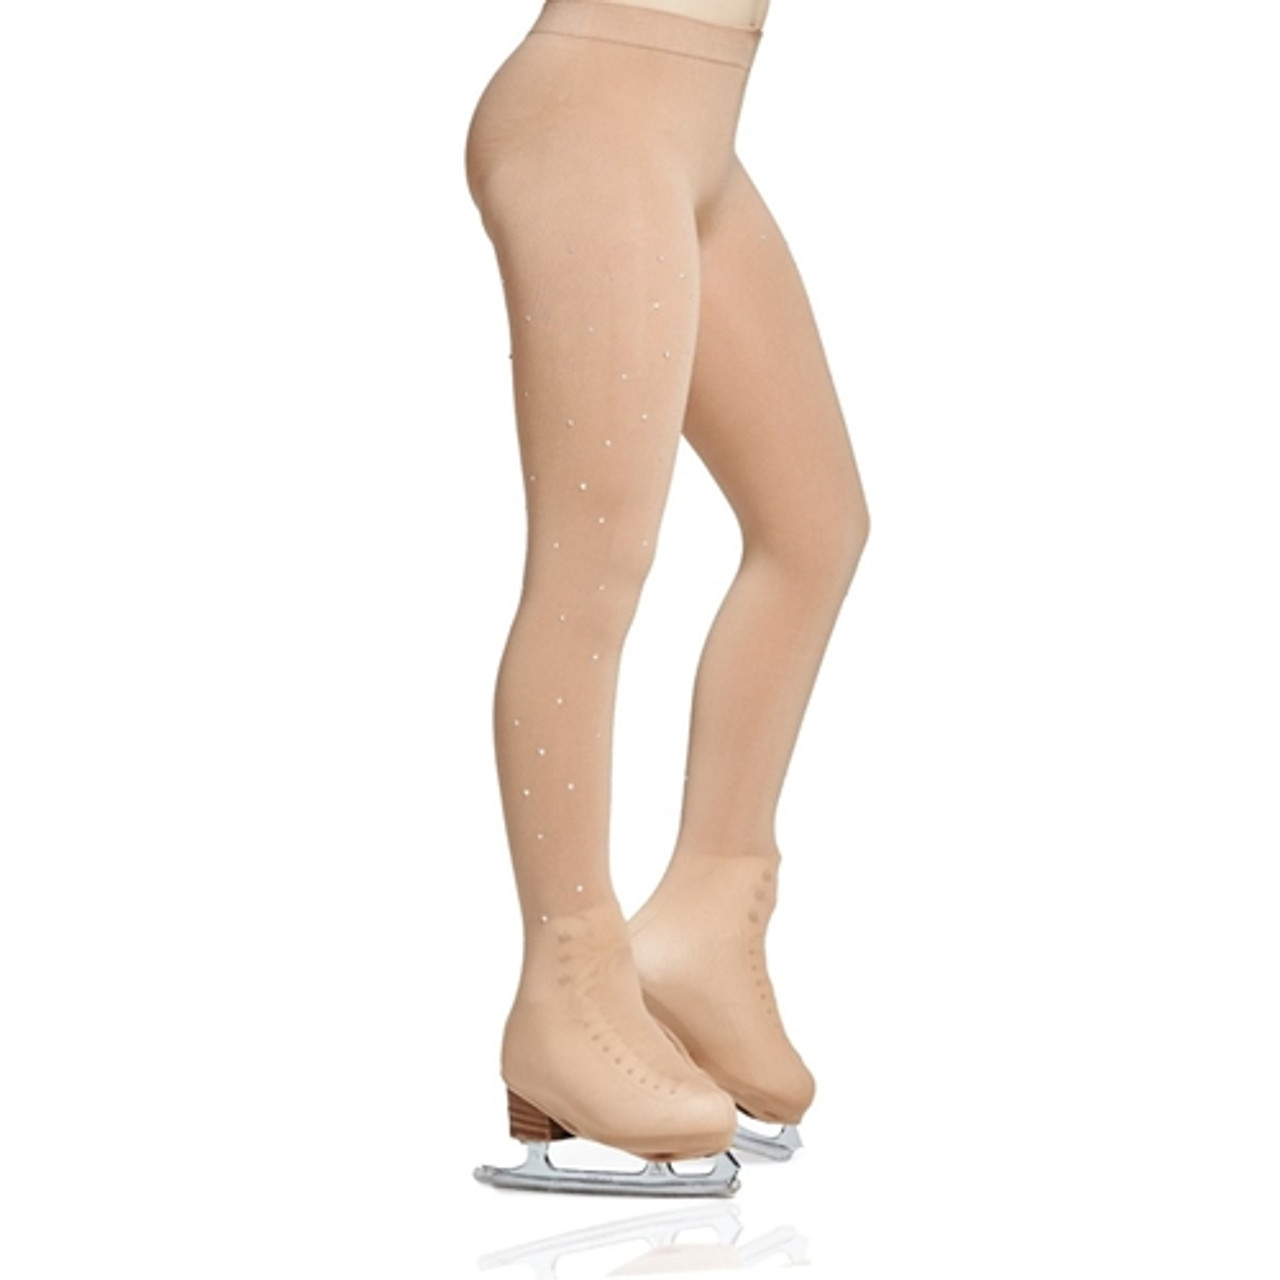 ice skating tights products for sale